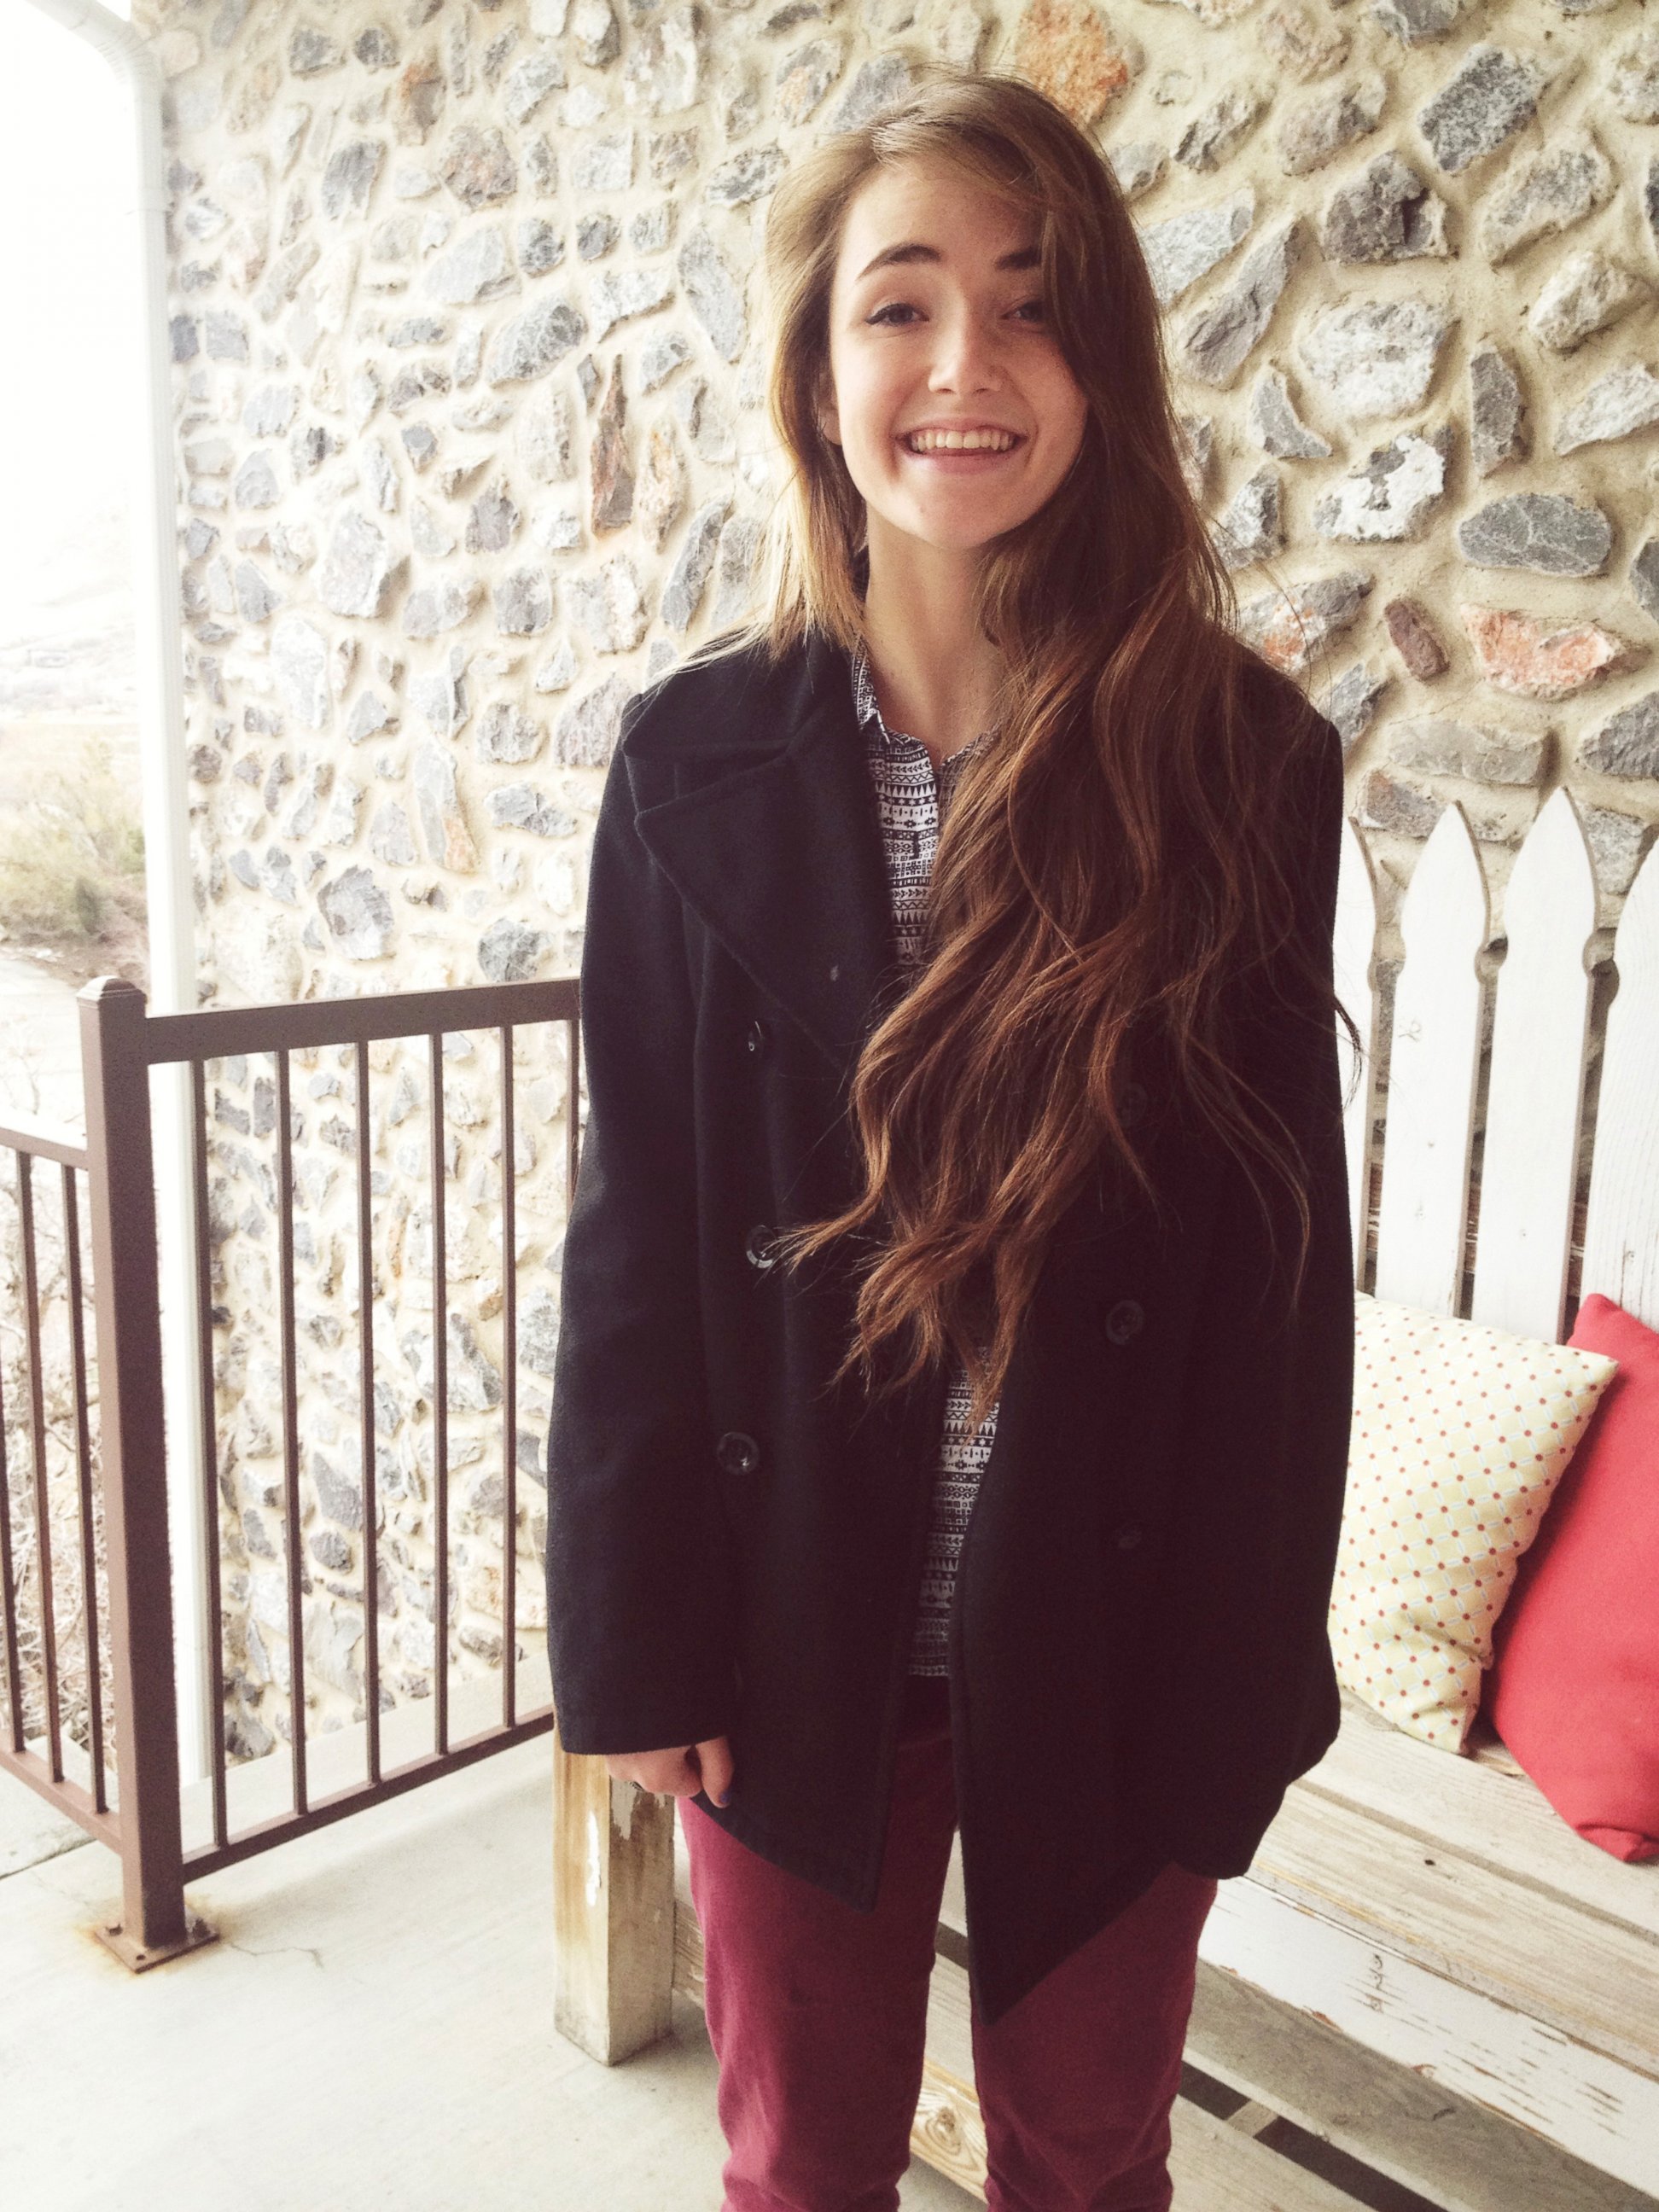 PHOTO: Alexandra Allen, a 17-year-old from Mapleton, Utah, has been diagnosed with an allergy to water. 